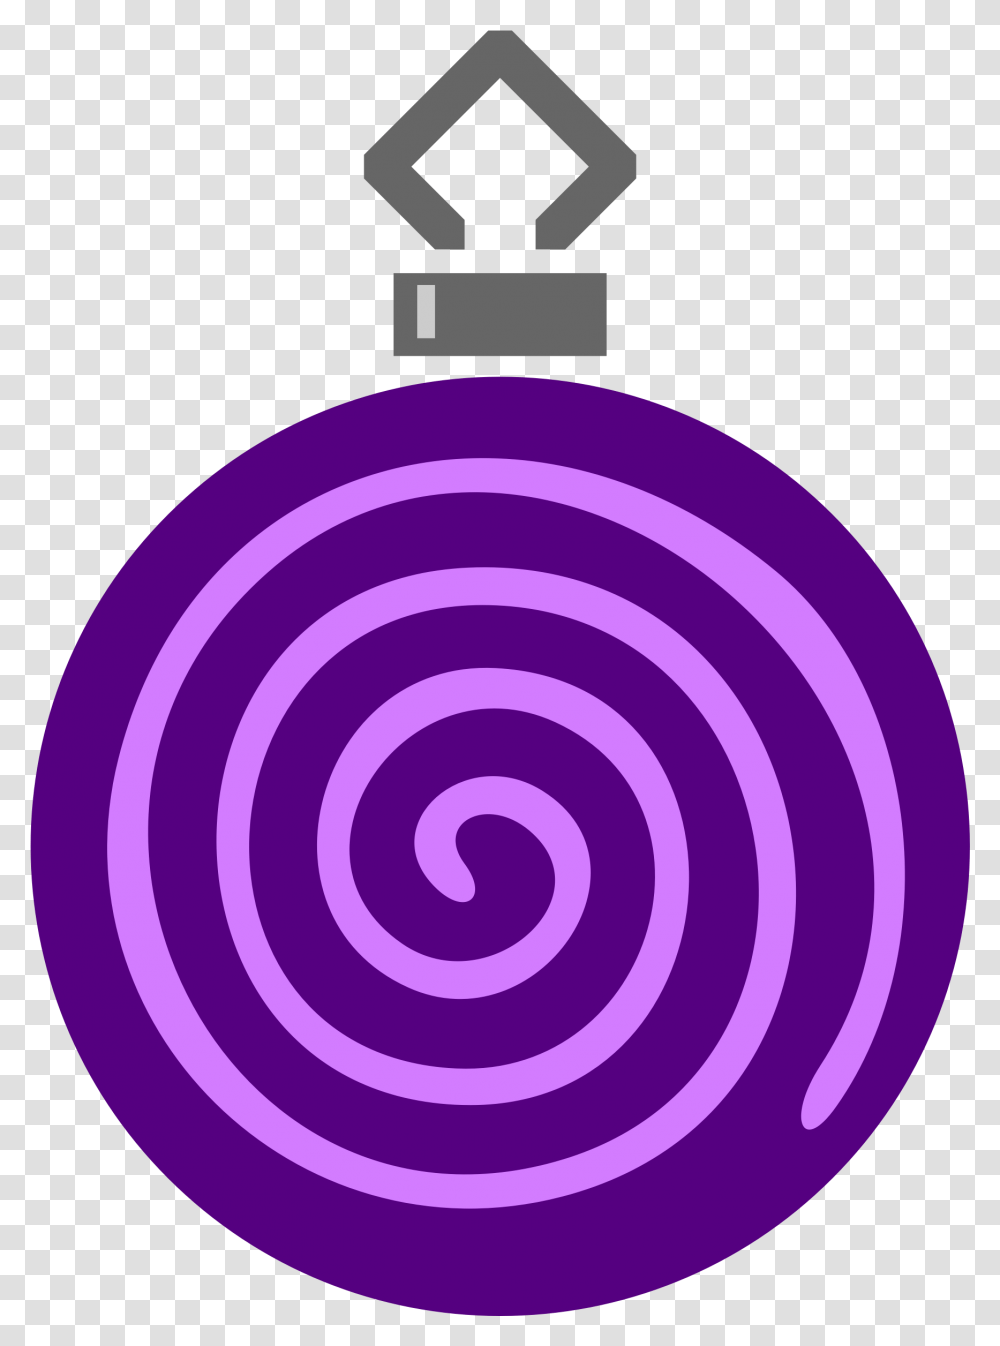 Clipart Simple Tree Bauble 8 Colour Army Ocs, Spiral, Rug, Coil Transparent Png